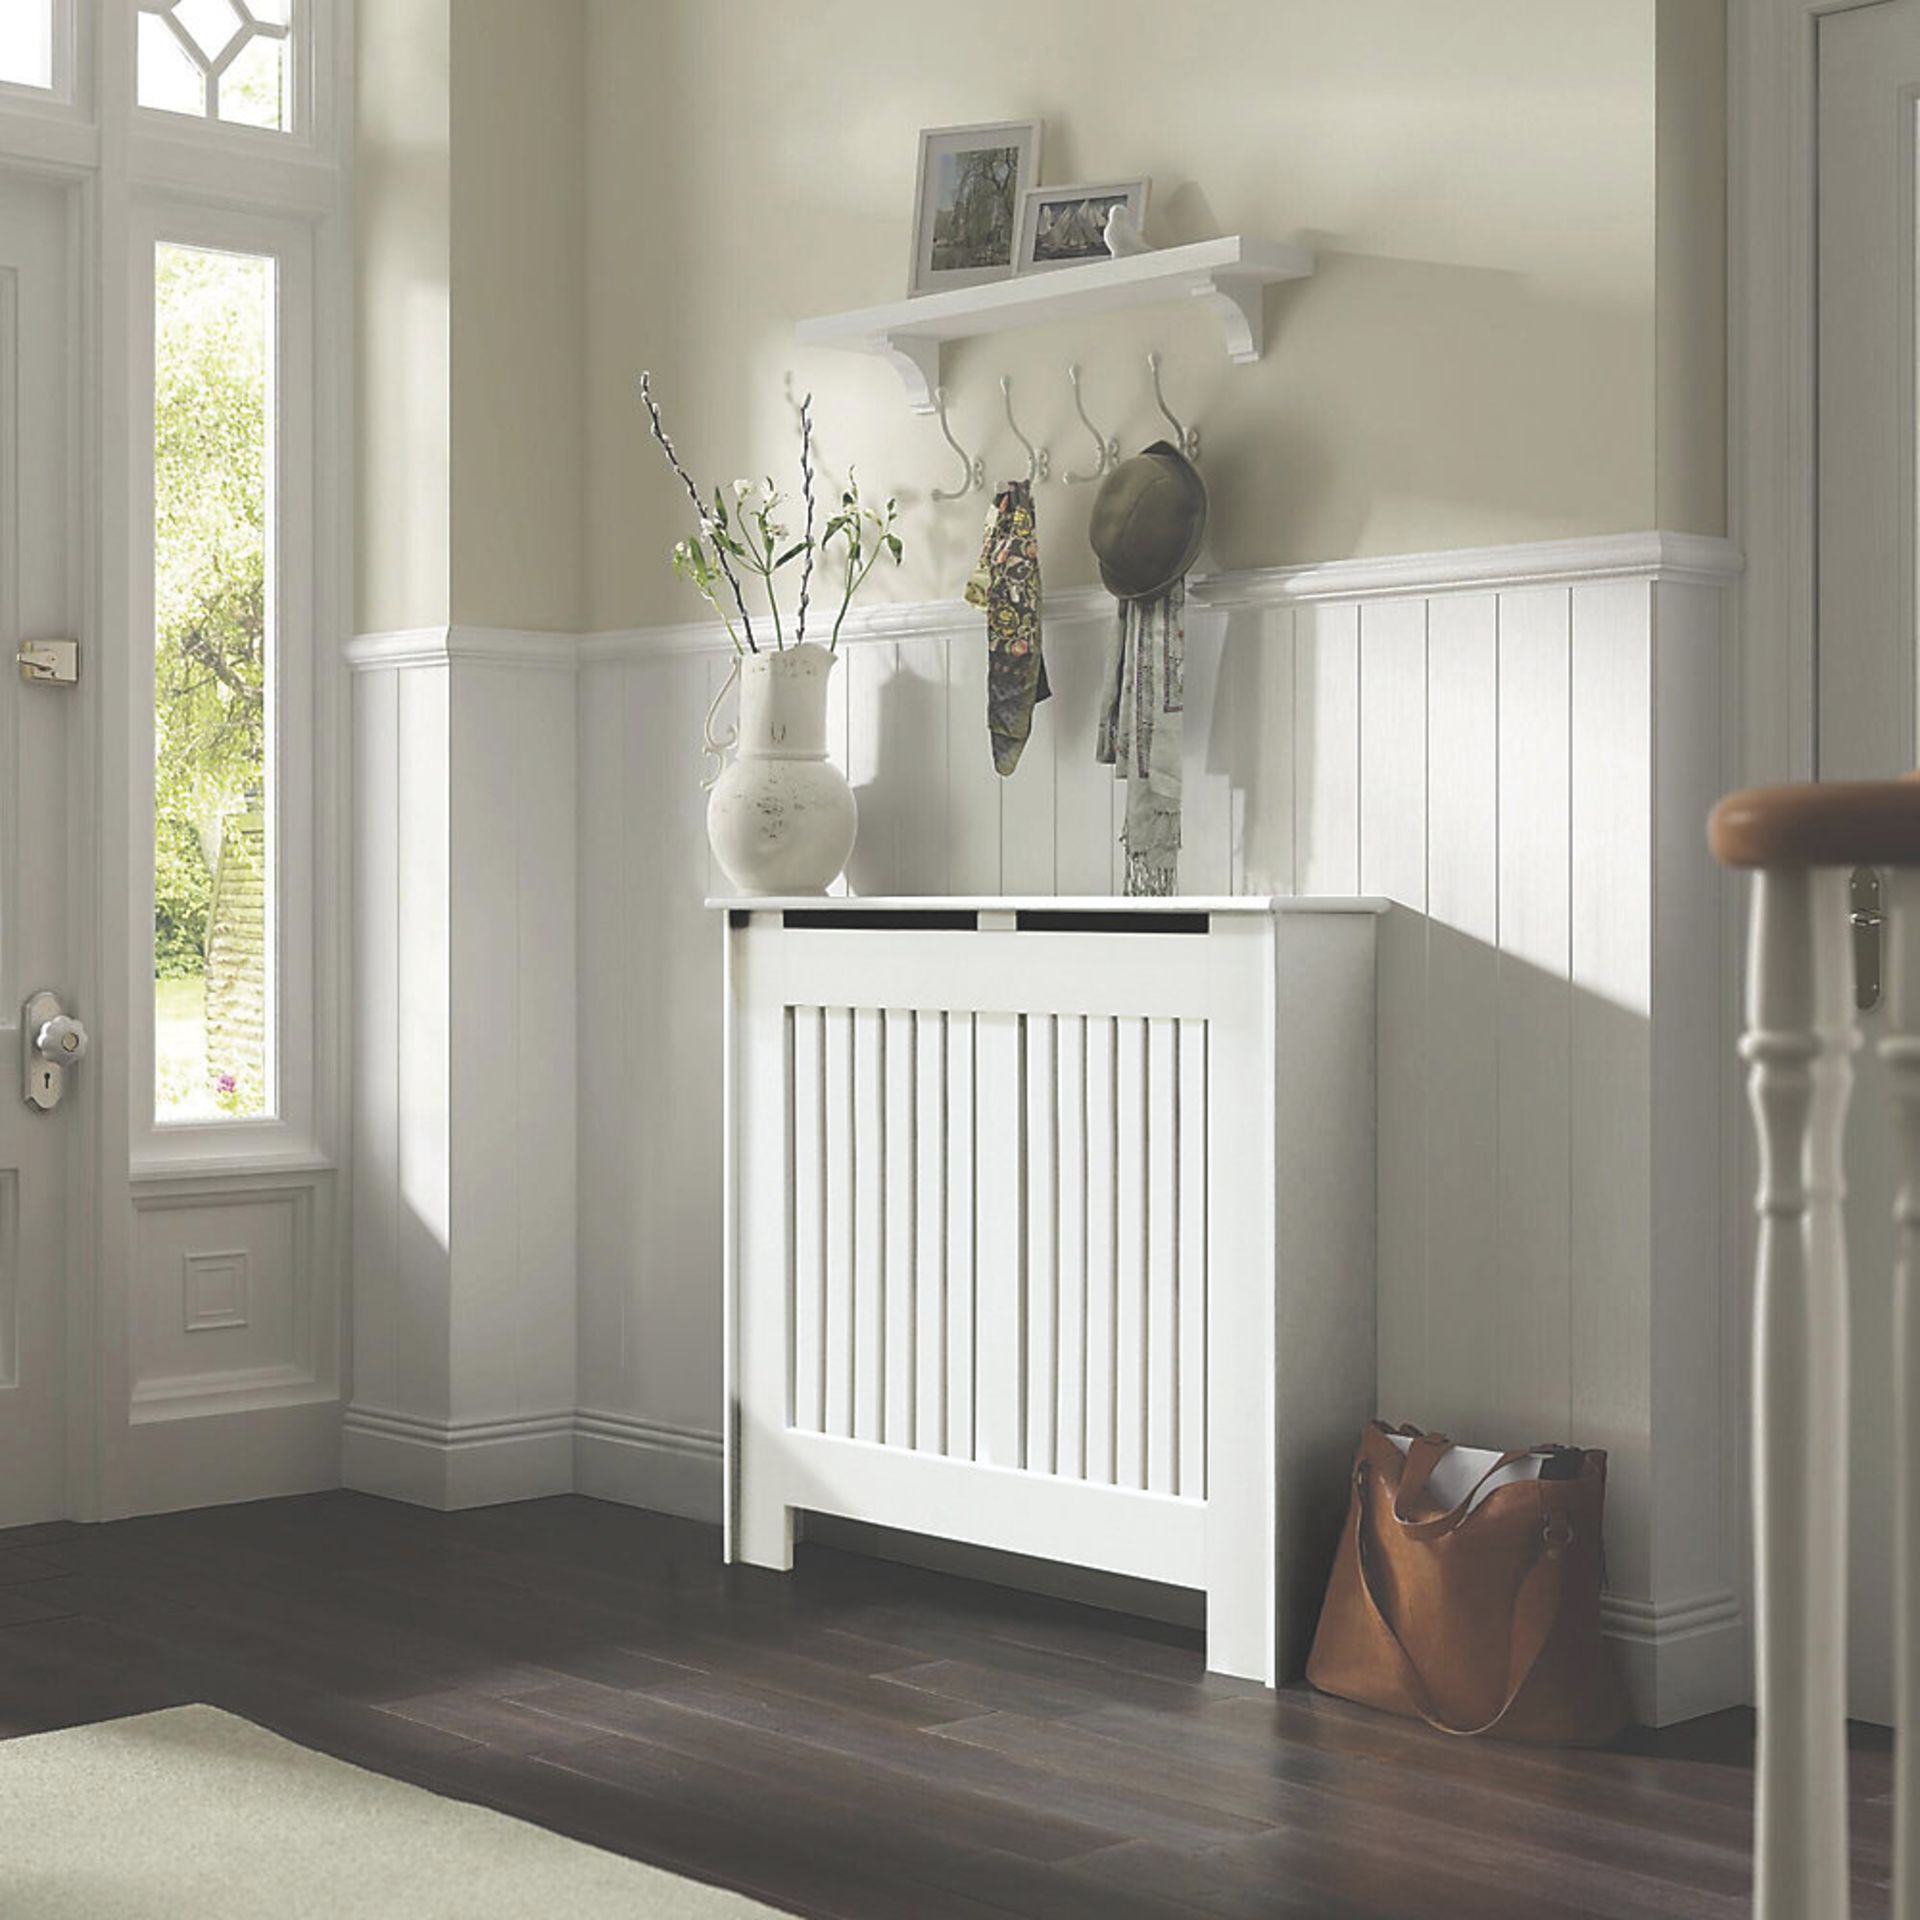 (JL69) 1020 X 180 X 800MM CONTEMPORARY KENSINGTON RADIATOR CABINET SMALL WHITE . Ideal for con...